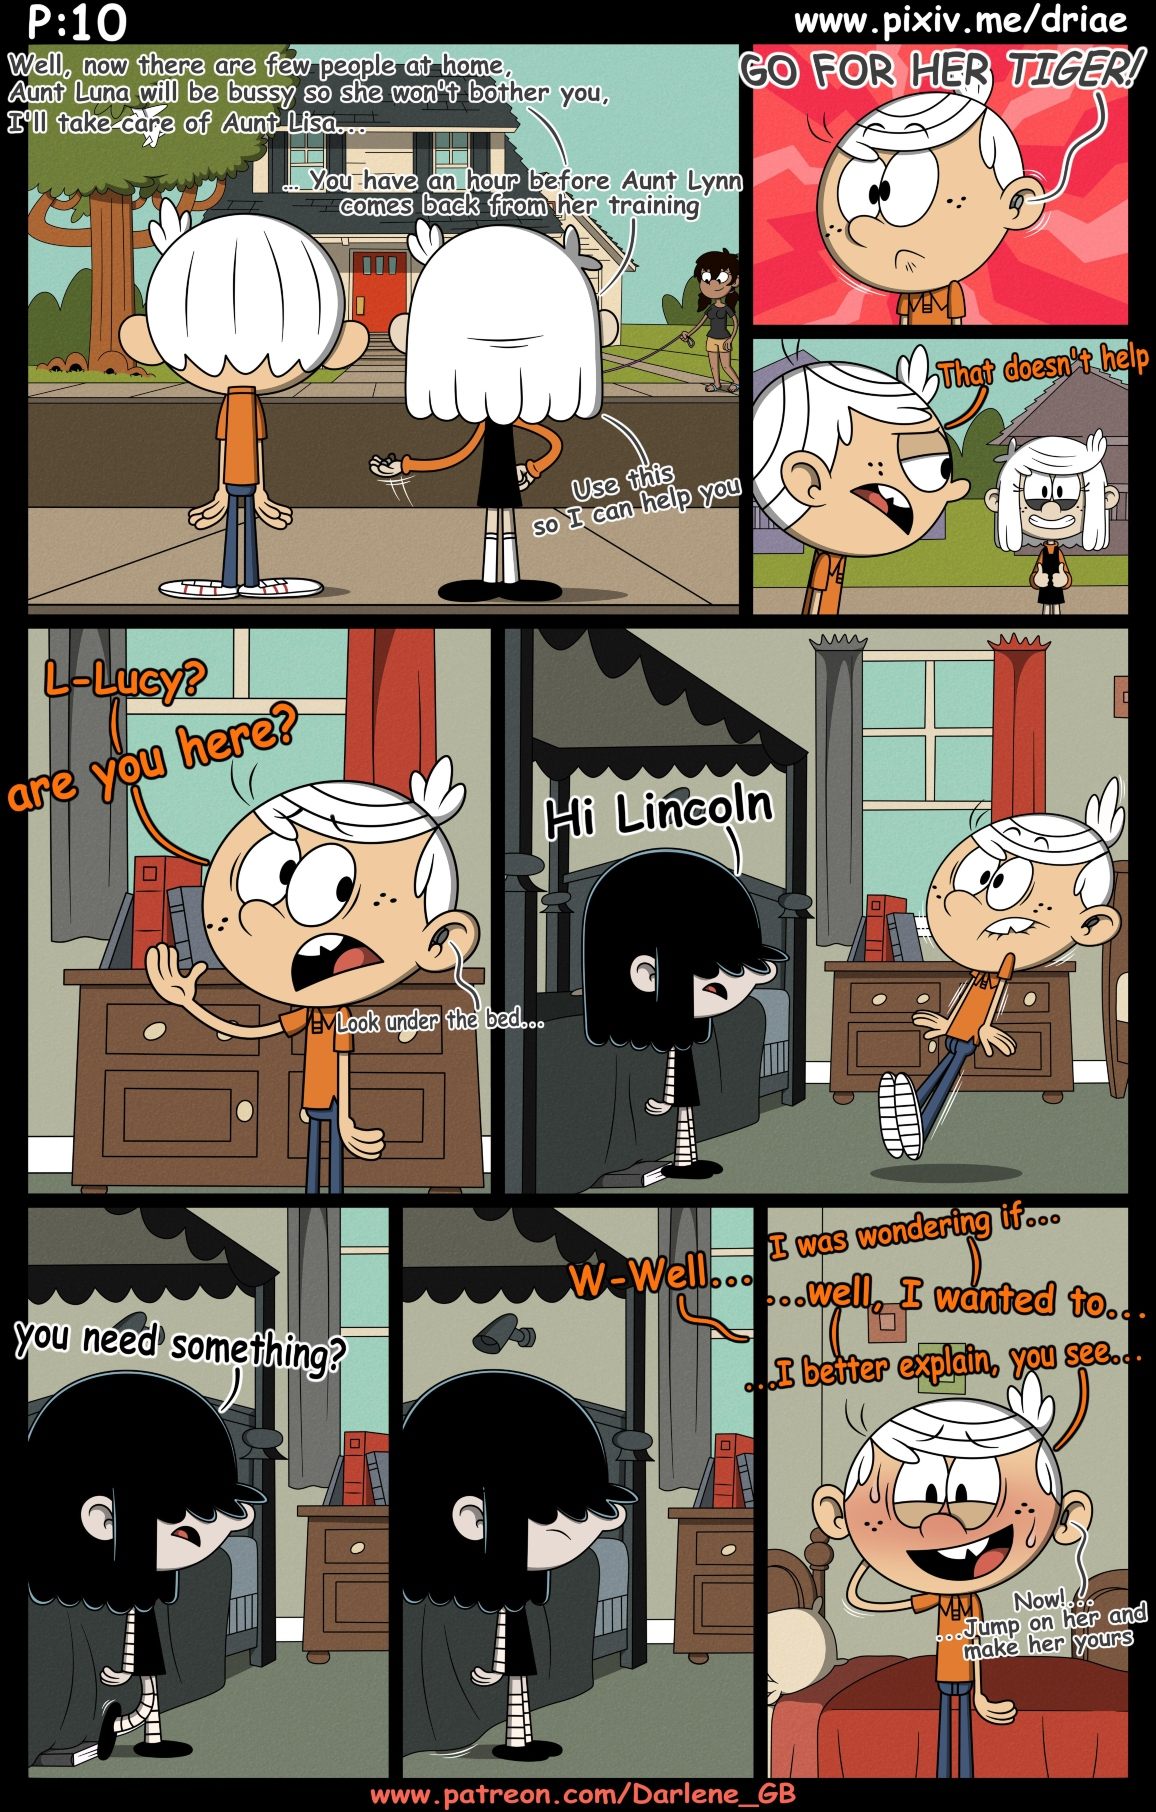 The Loud Timeline – The Loud House by DriAE